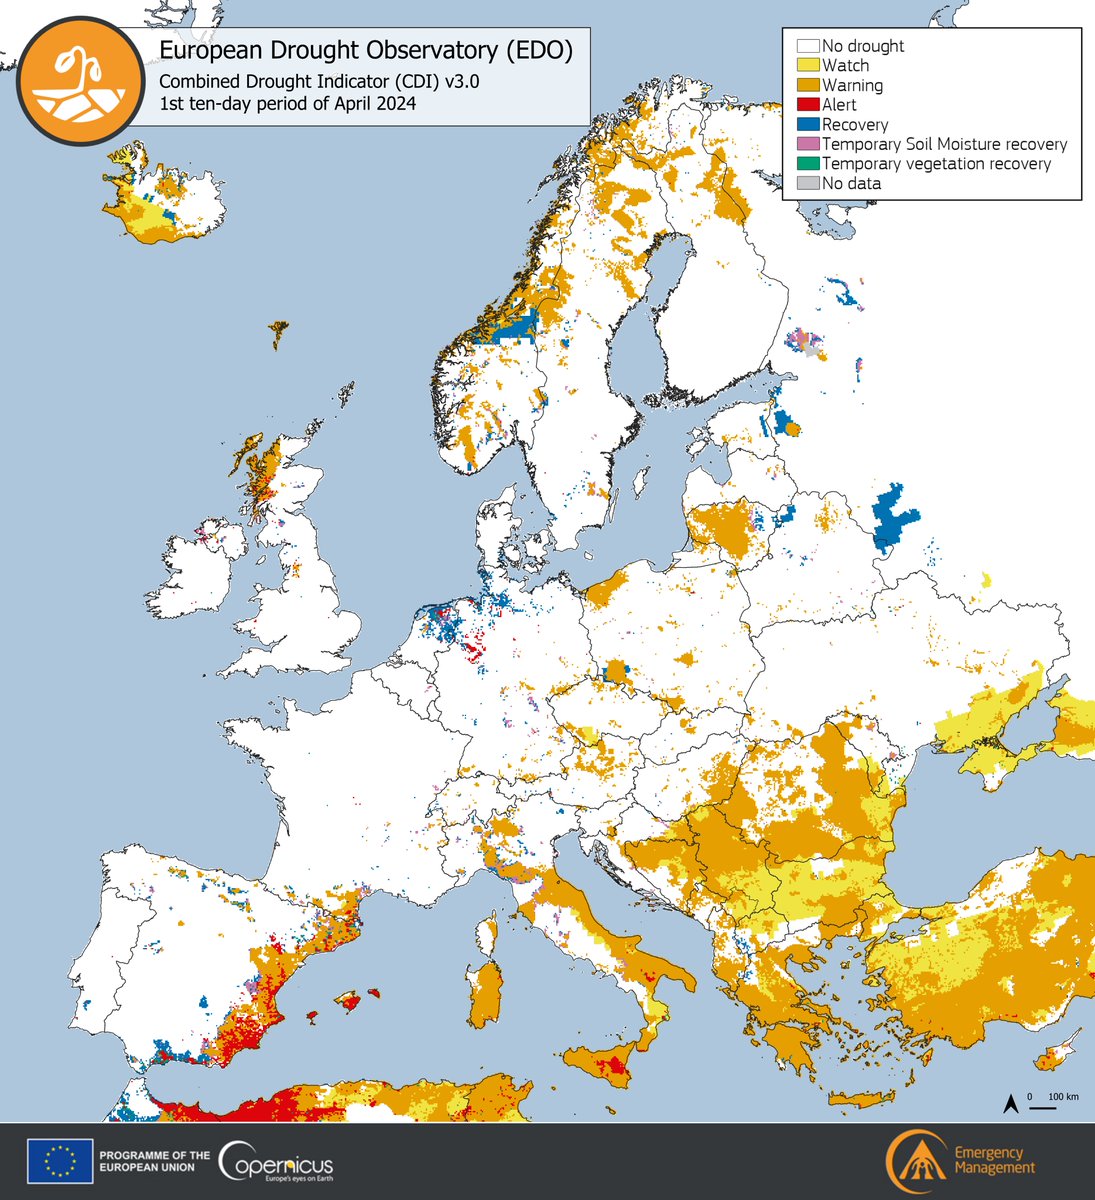 According to our latest #EDO CDI for the first ten-day period of April, #drought 🚱 conditions were persistent across southern Europe ➡️ Warning 🟠 and Alert 🔴 conditions were present over most of the #Mediterranean region More at👇 e.copernicus.eu/EDO_CDI